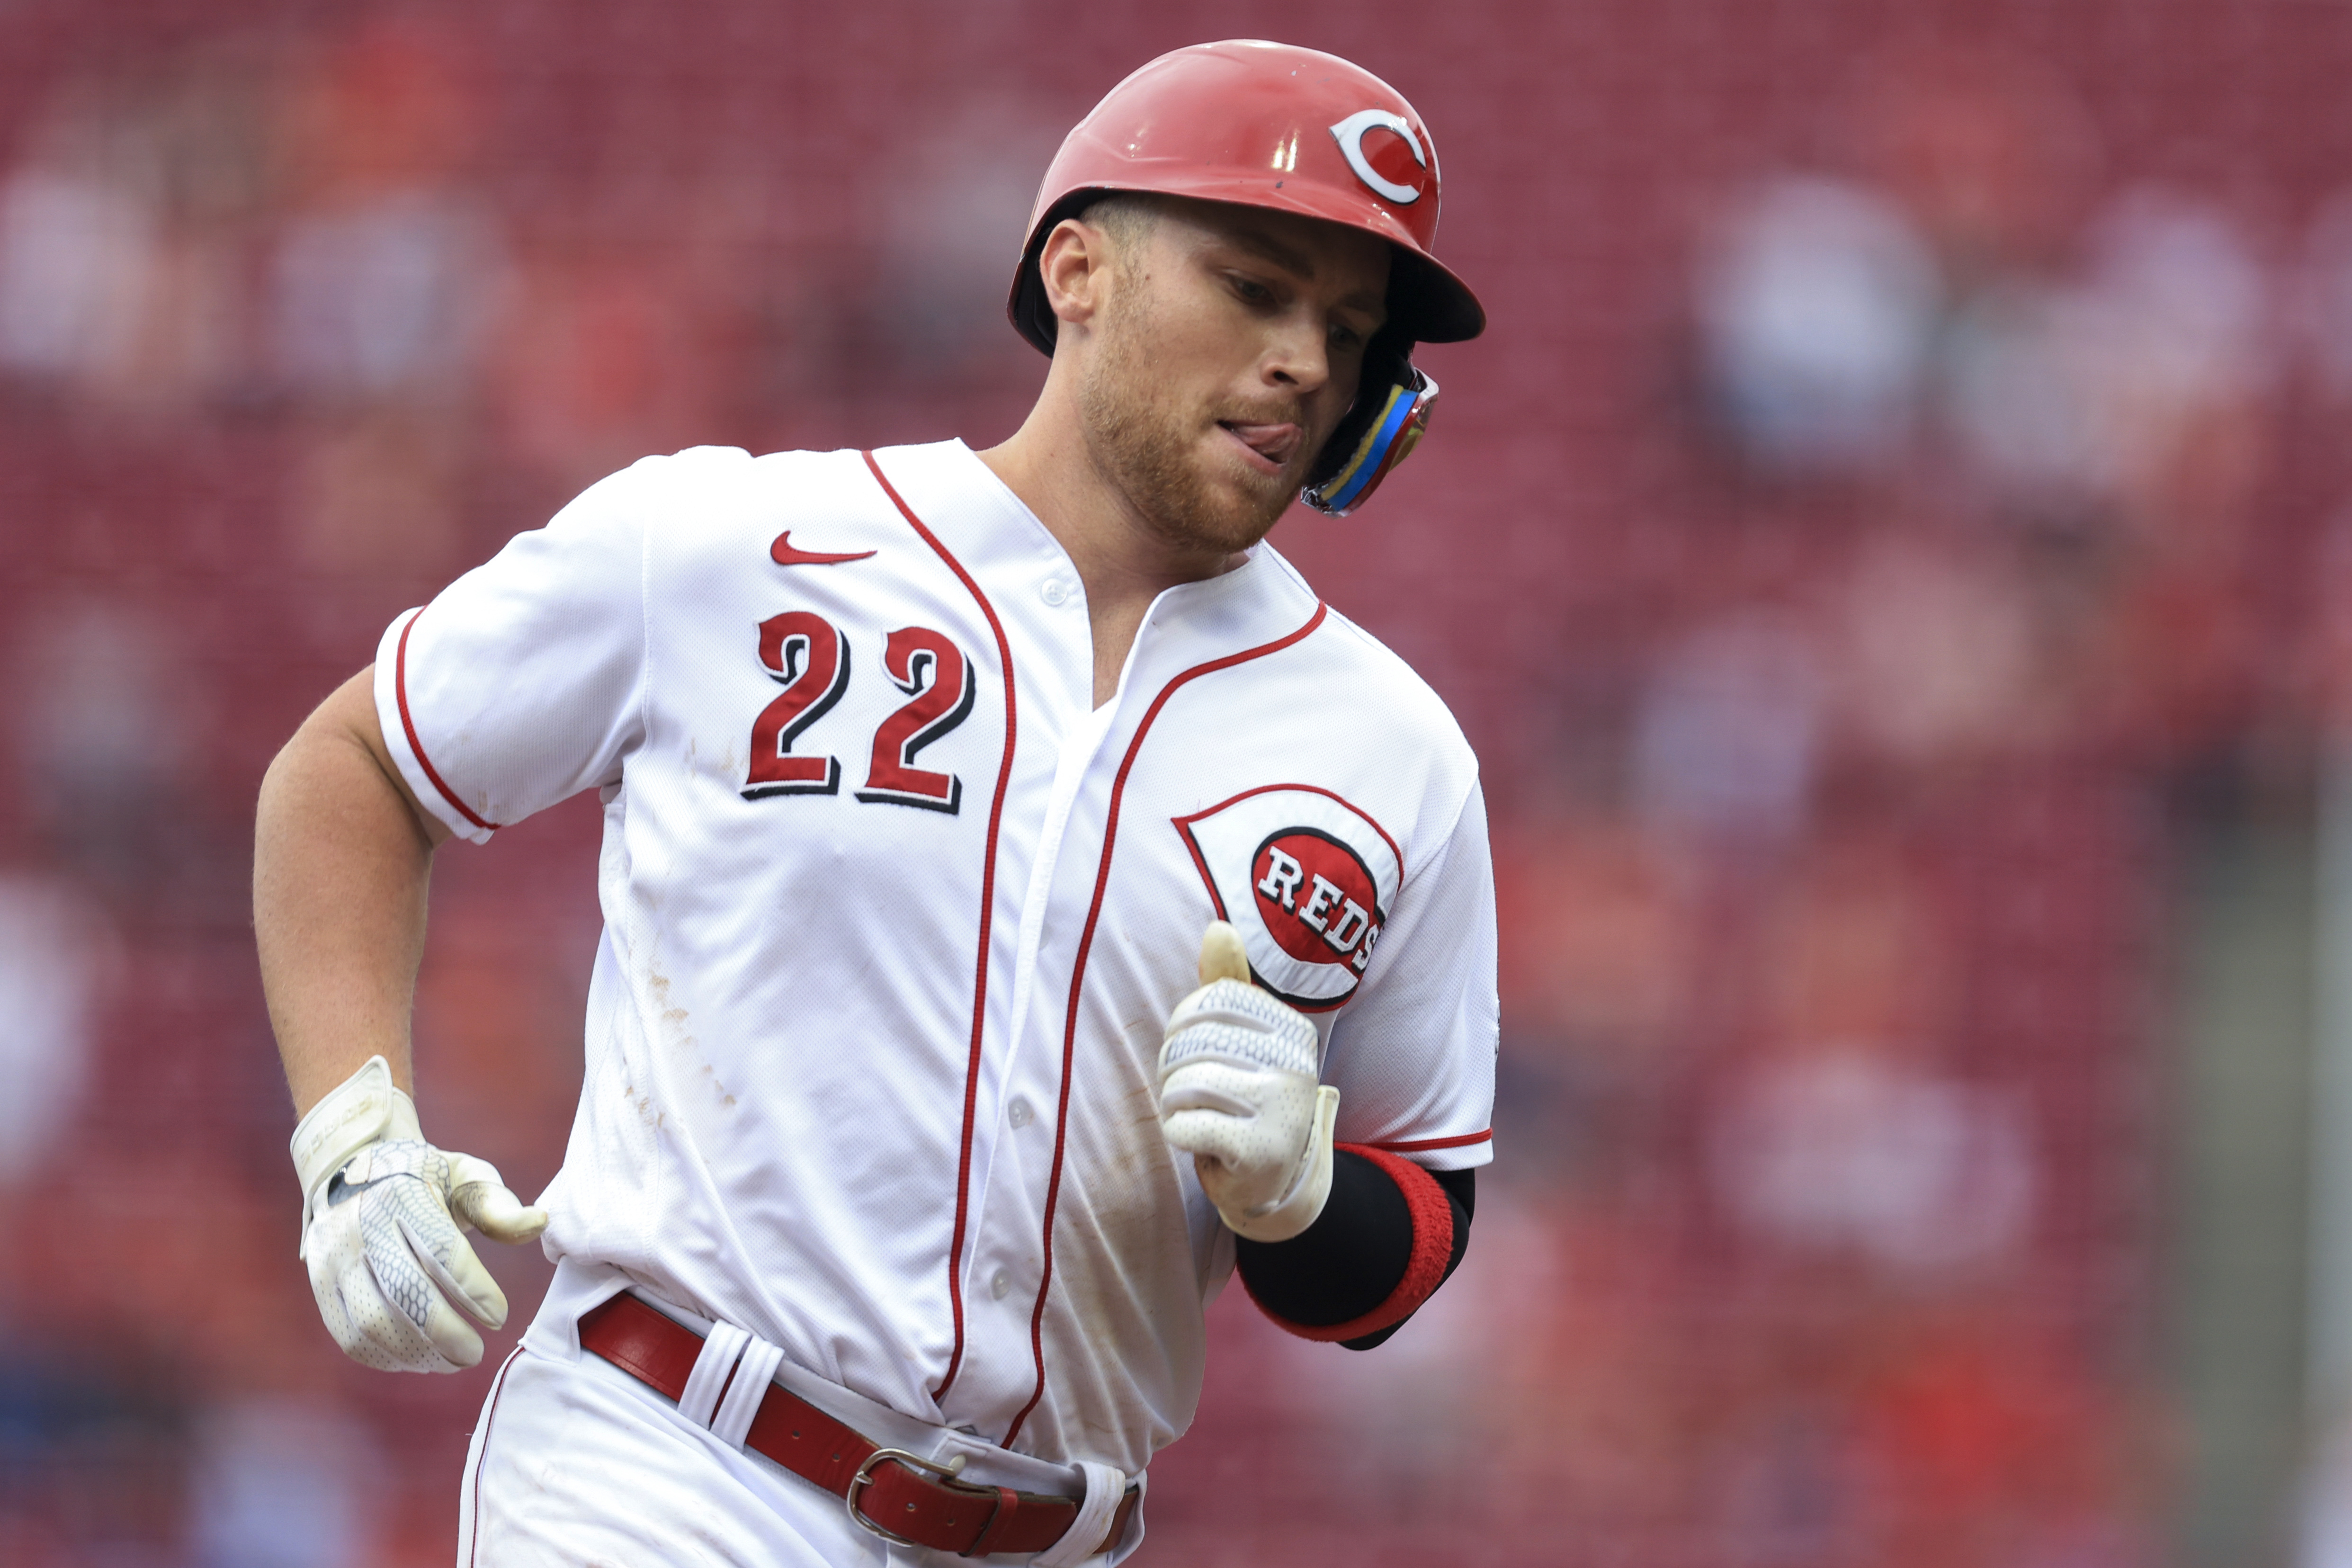 Reds 2018: Rainey hopes to cut down on walks